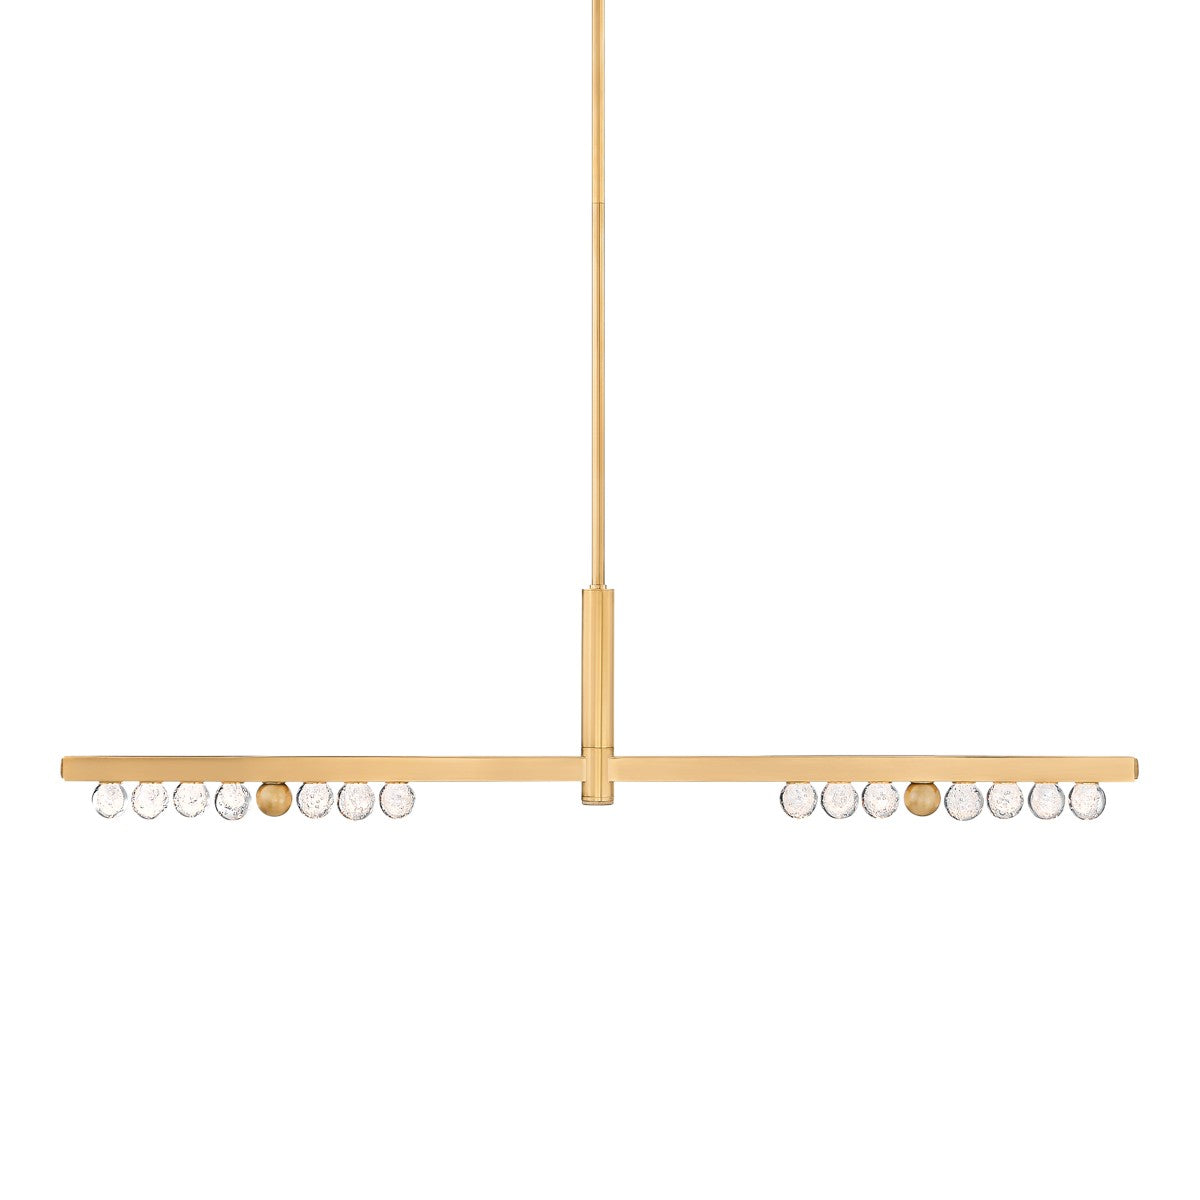 Corbett Lighting LED Linear from the Annecy collection in Vintage Brass finish